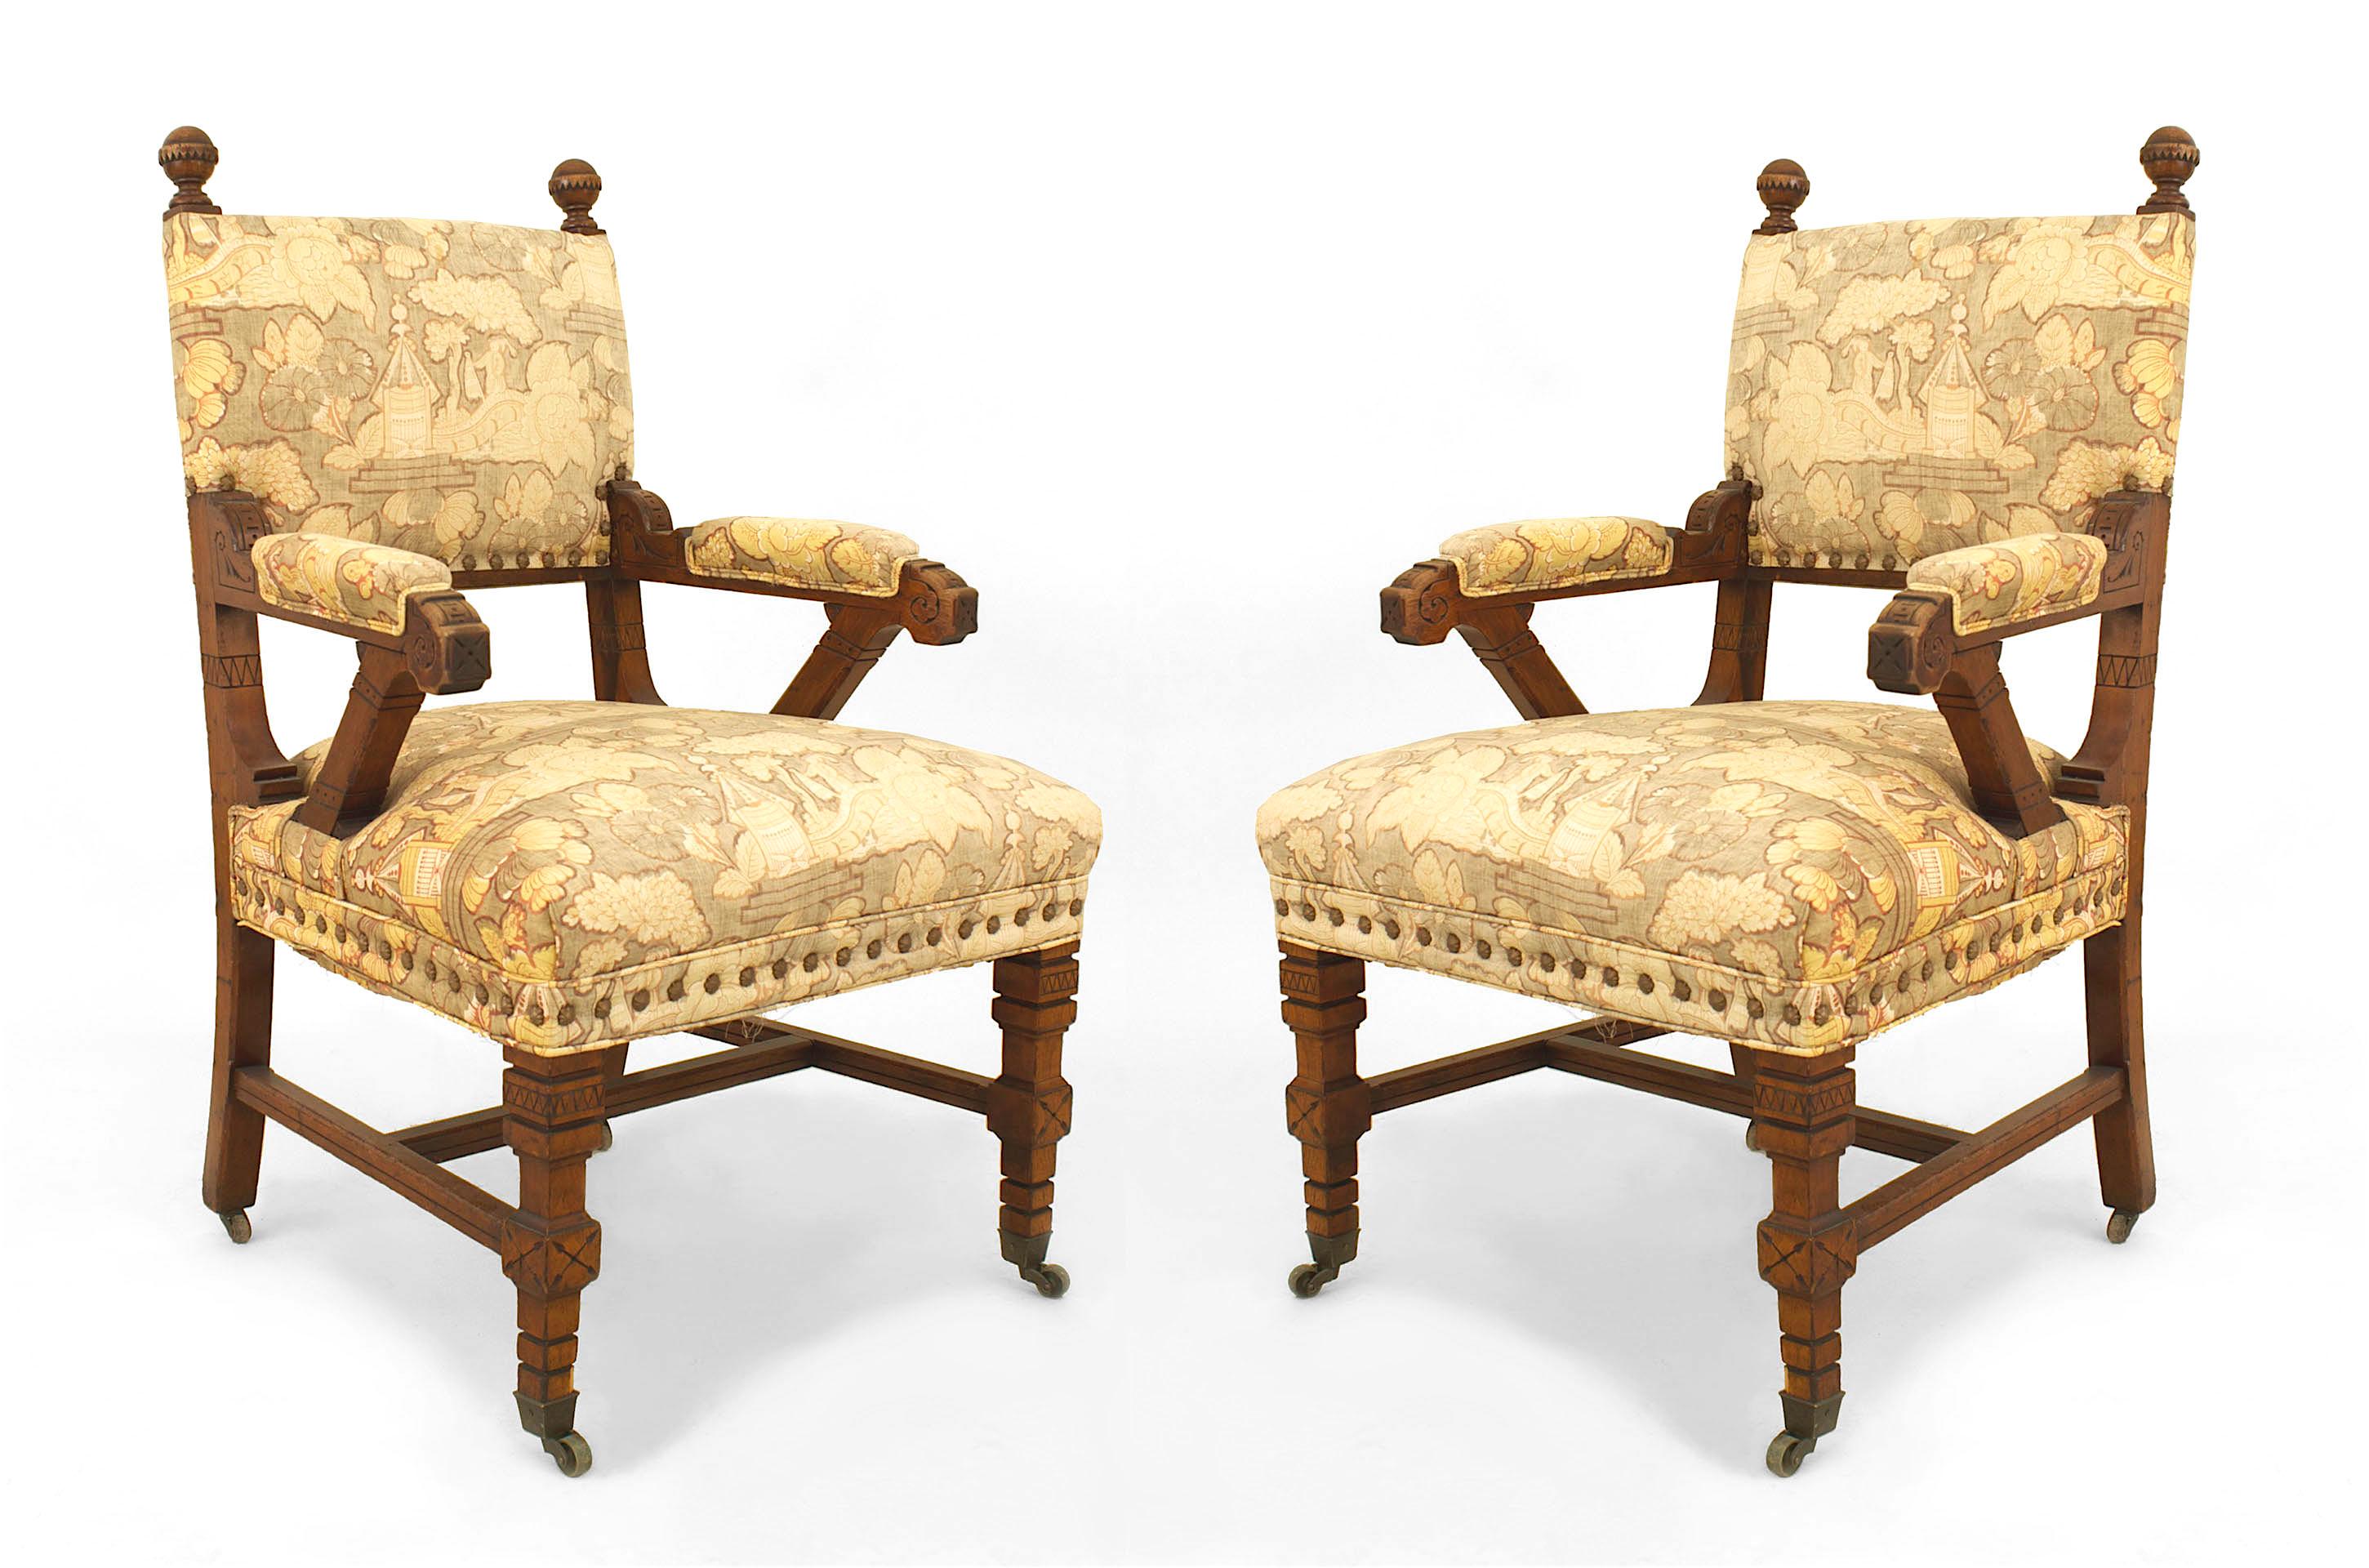 Pair of English Arts & Crafts (Aesthetic Movement) mahogany Armchairs with finials on back and an 